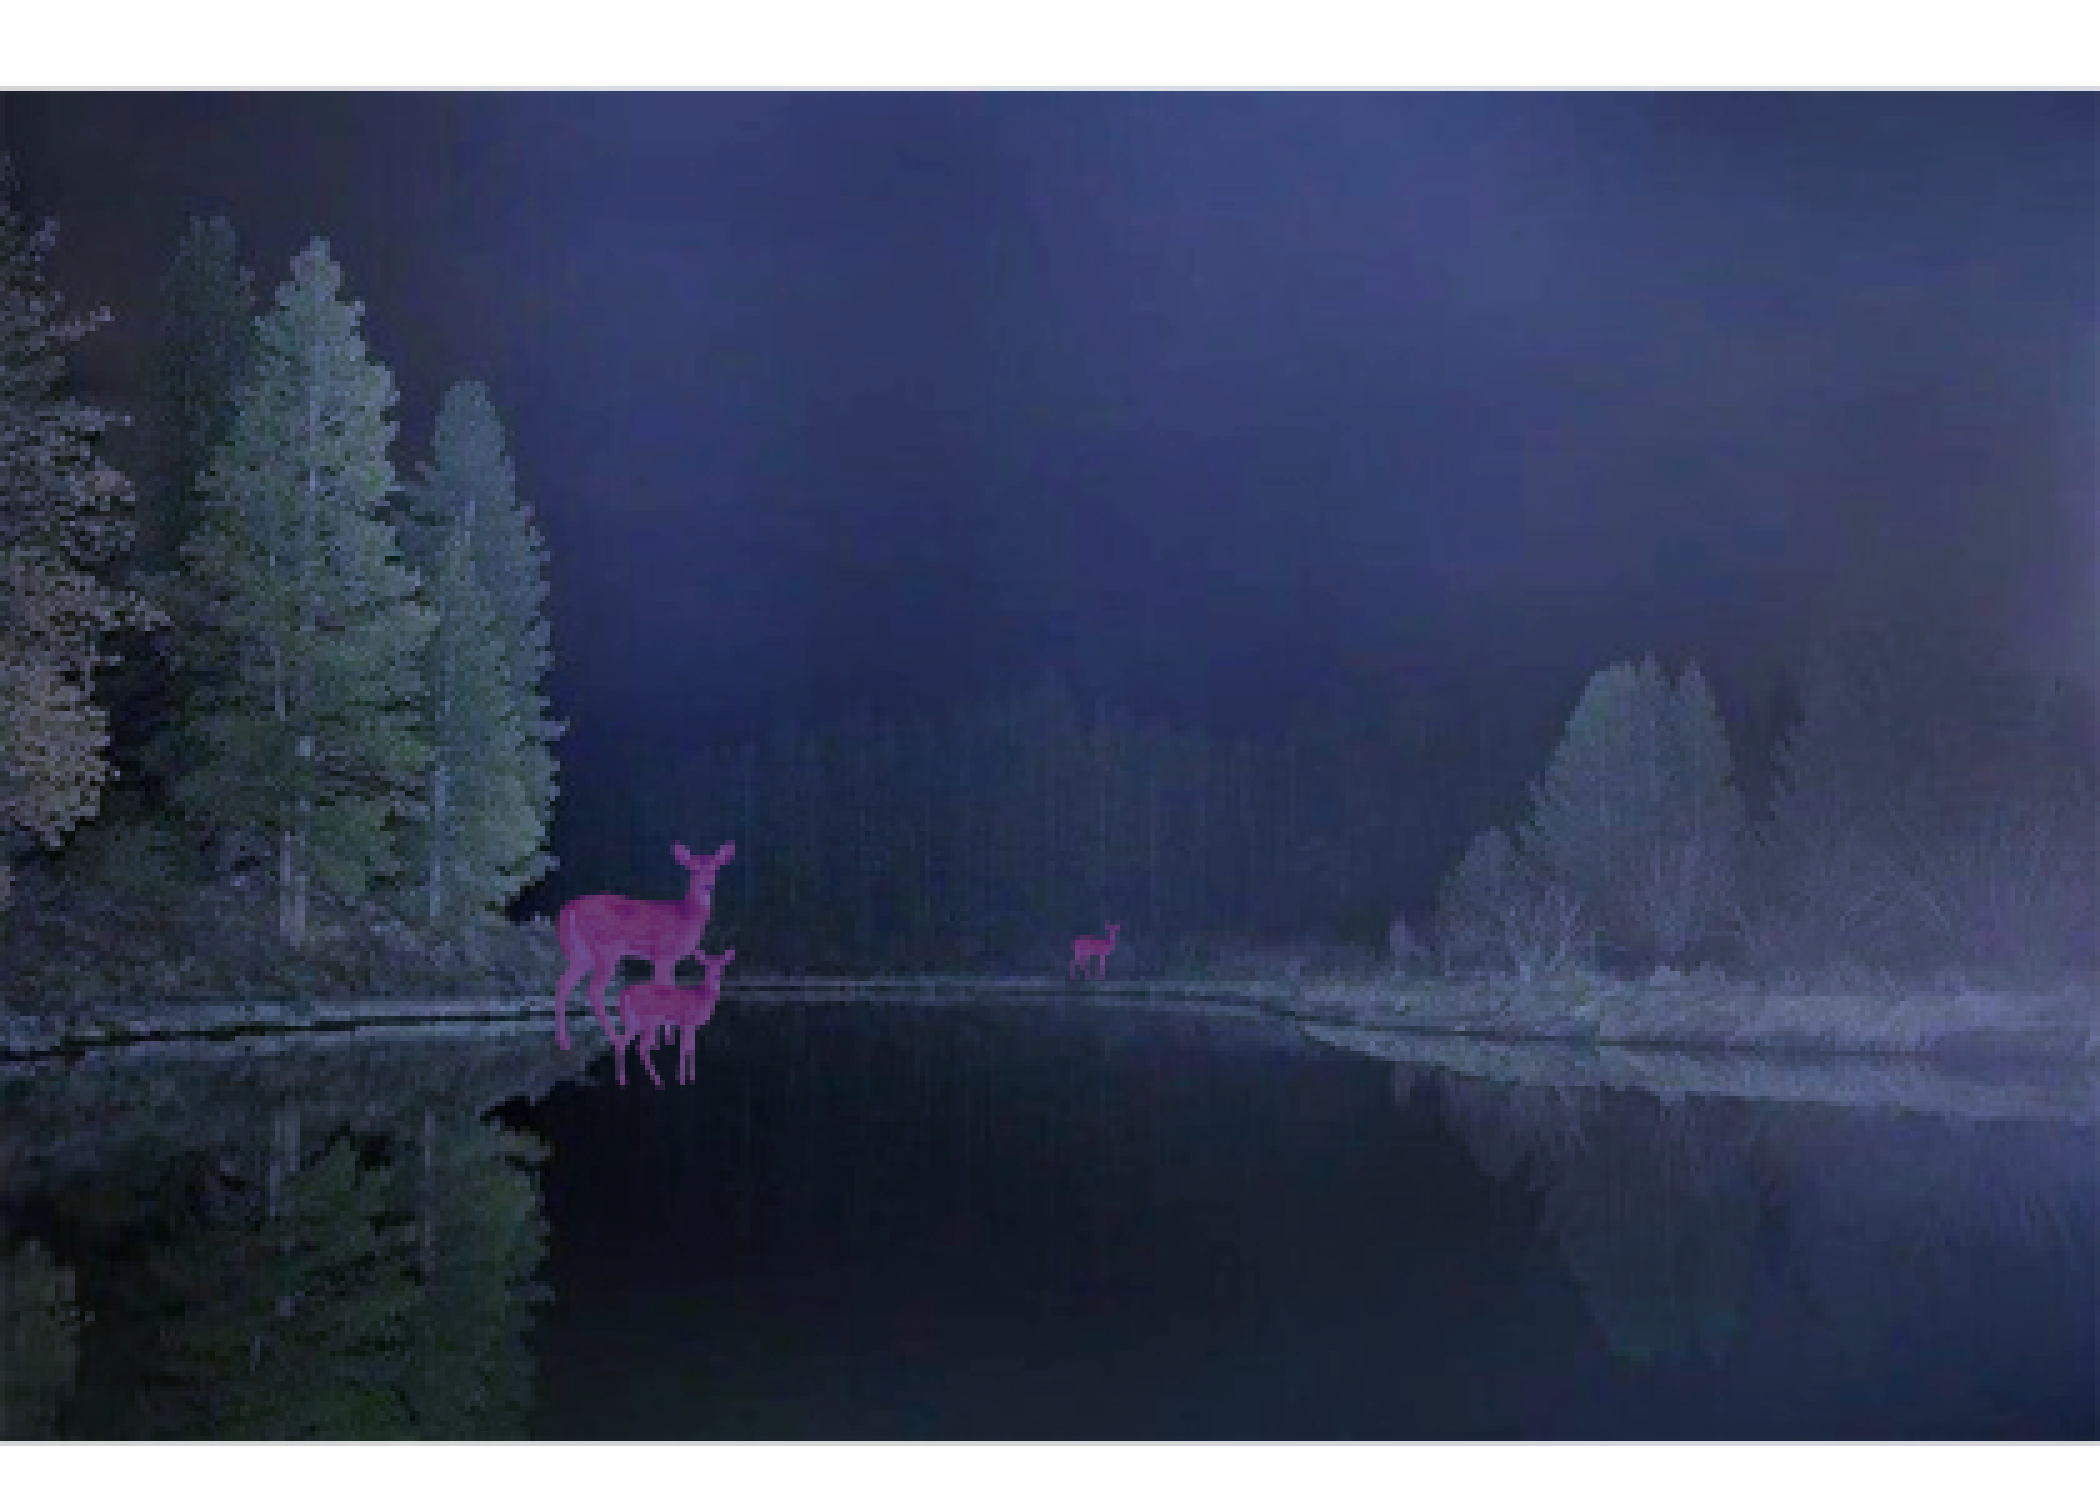 A wide shot overlooking a liminal lake, fog hangs low on the water. A group of pink deer stand, both on the edge and along the rim of the water, staring down the viewer.